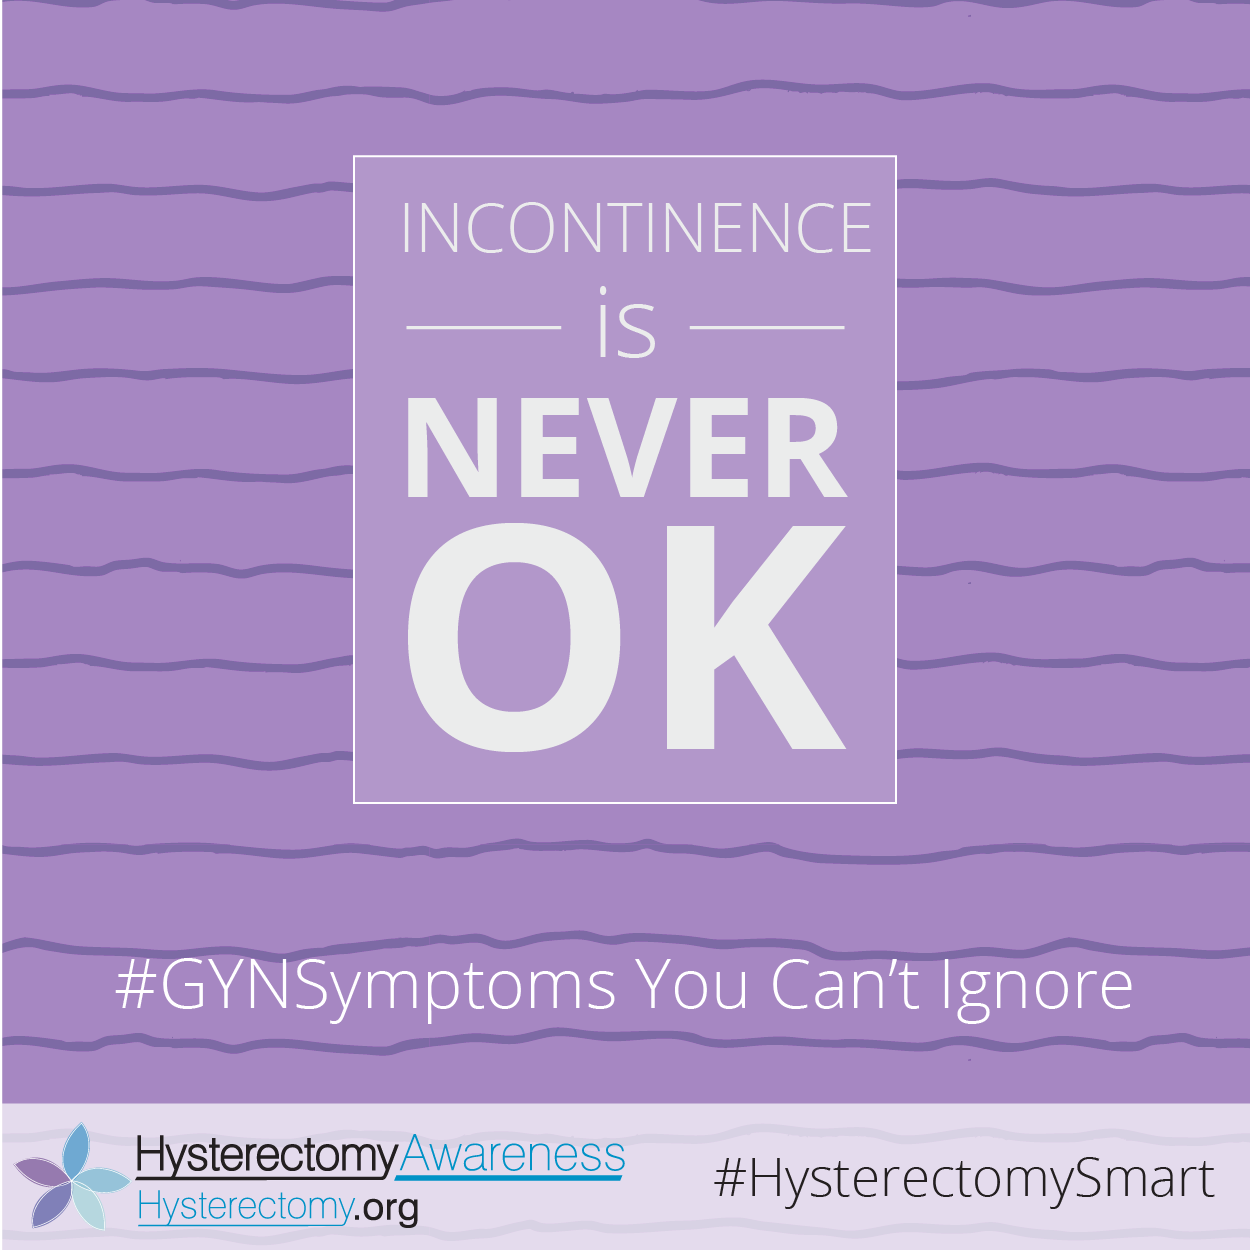 Incontinence is NEVER OK #GYNSymptoms You can’t Ignore #HysterectomySmart